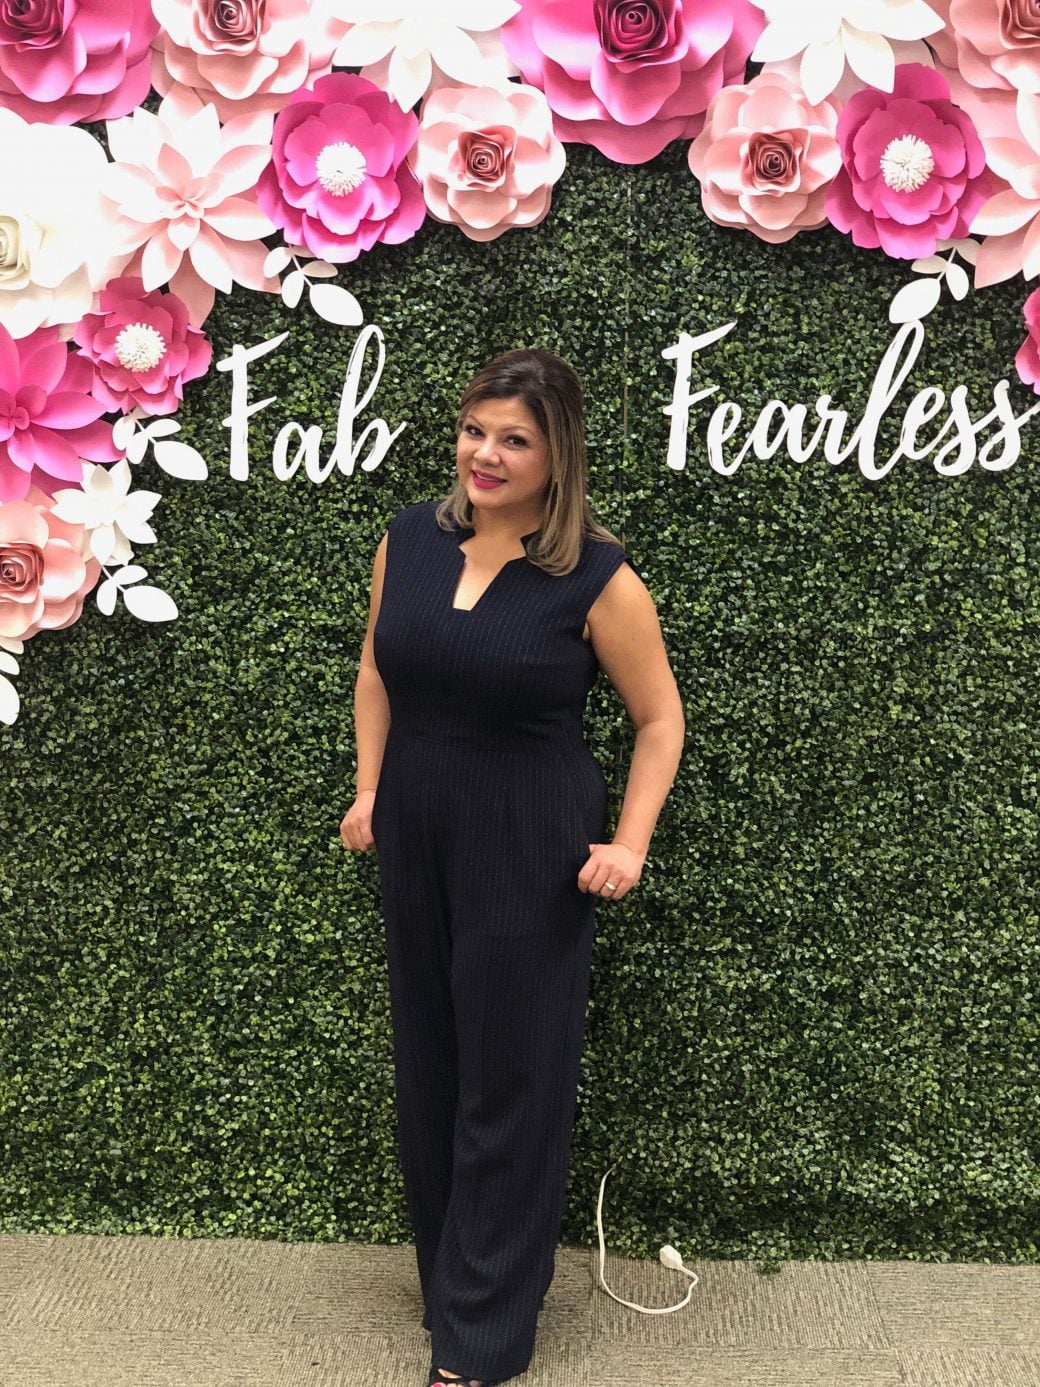 IMG 2681 1040x1387 - Fab & Fearless Speaker Series - March 2019